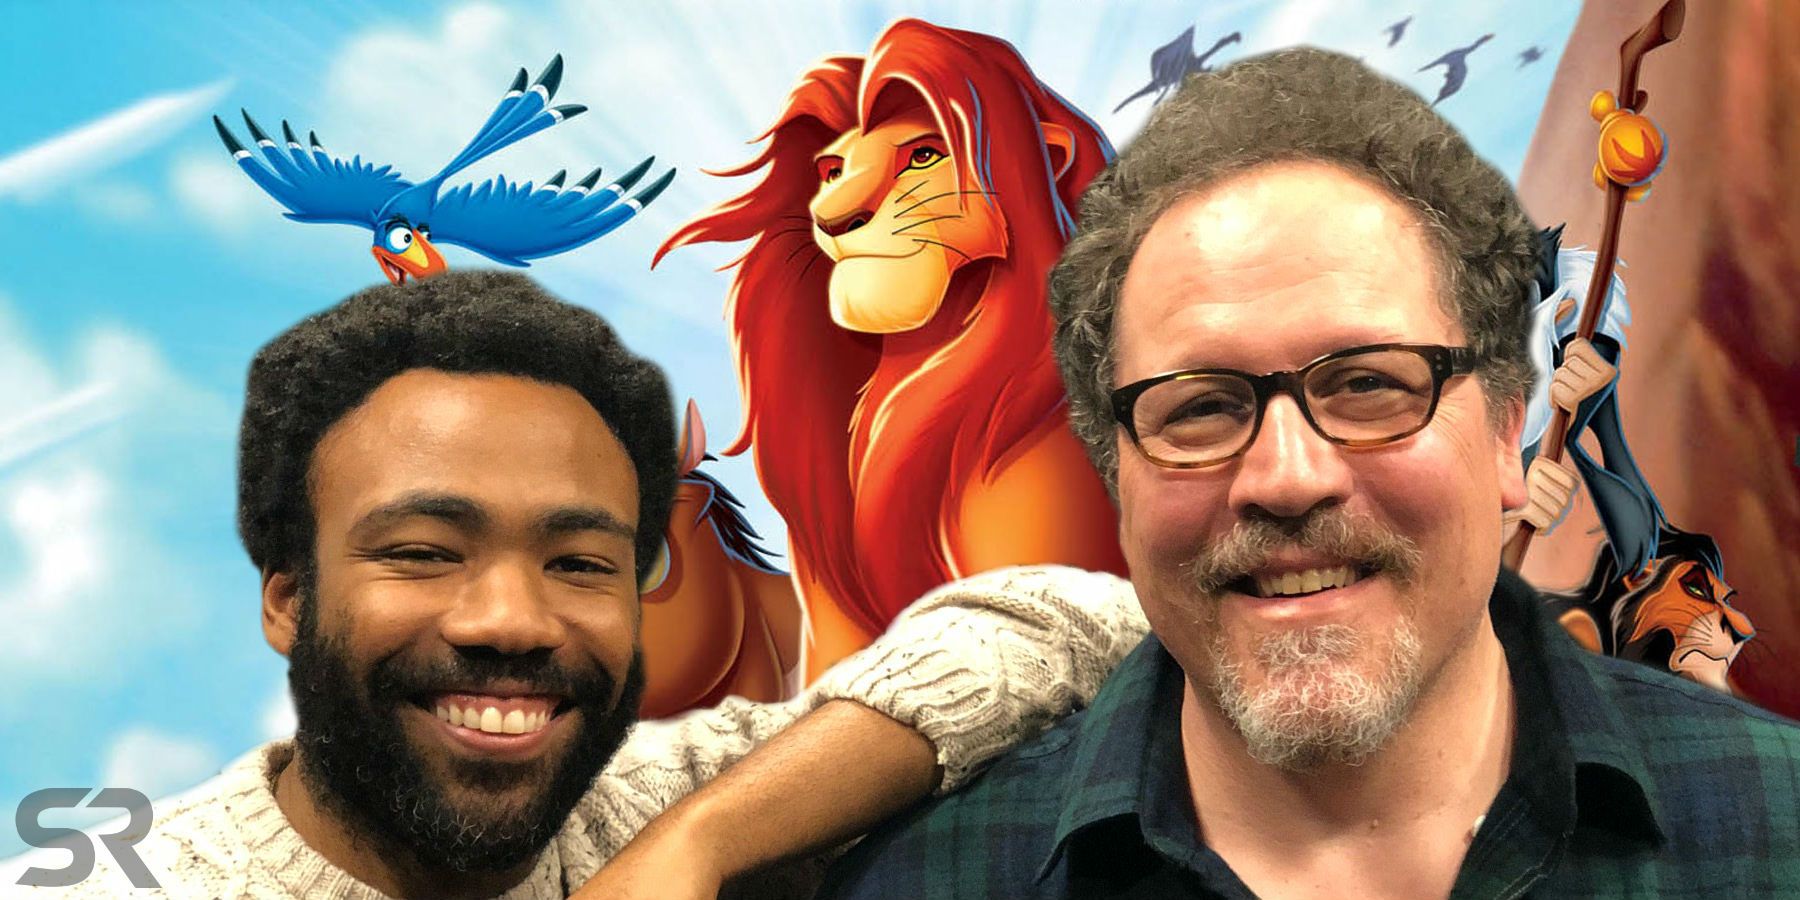 The Lion King: Donald Glover Brings a Fresh New Energy to Simba